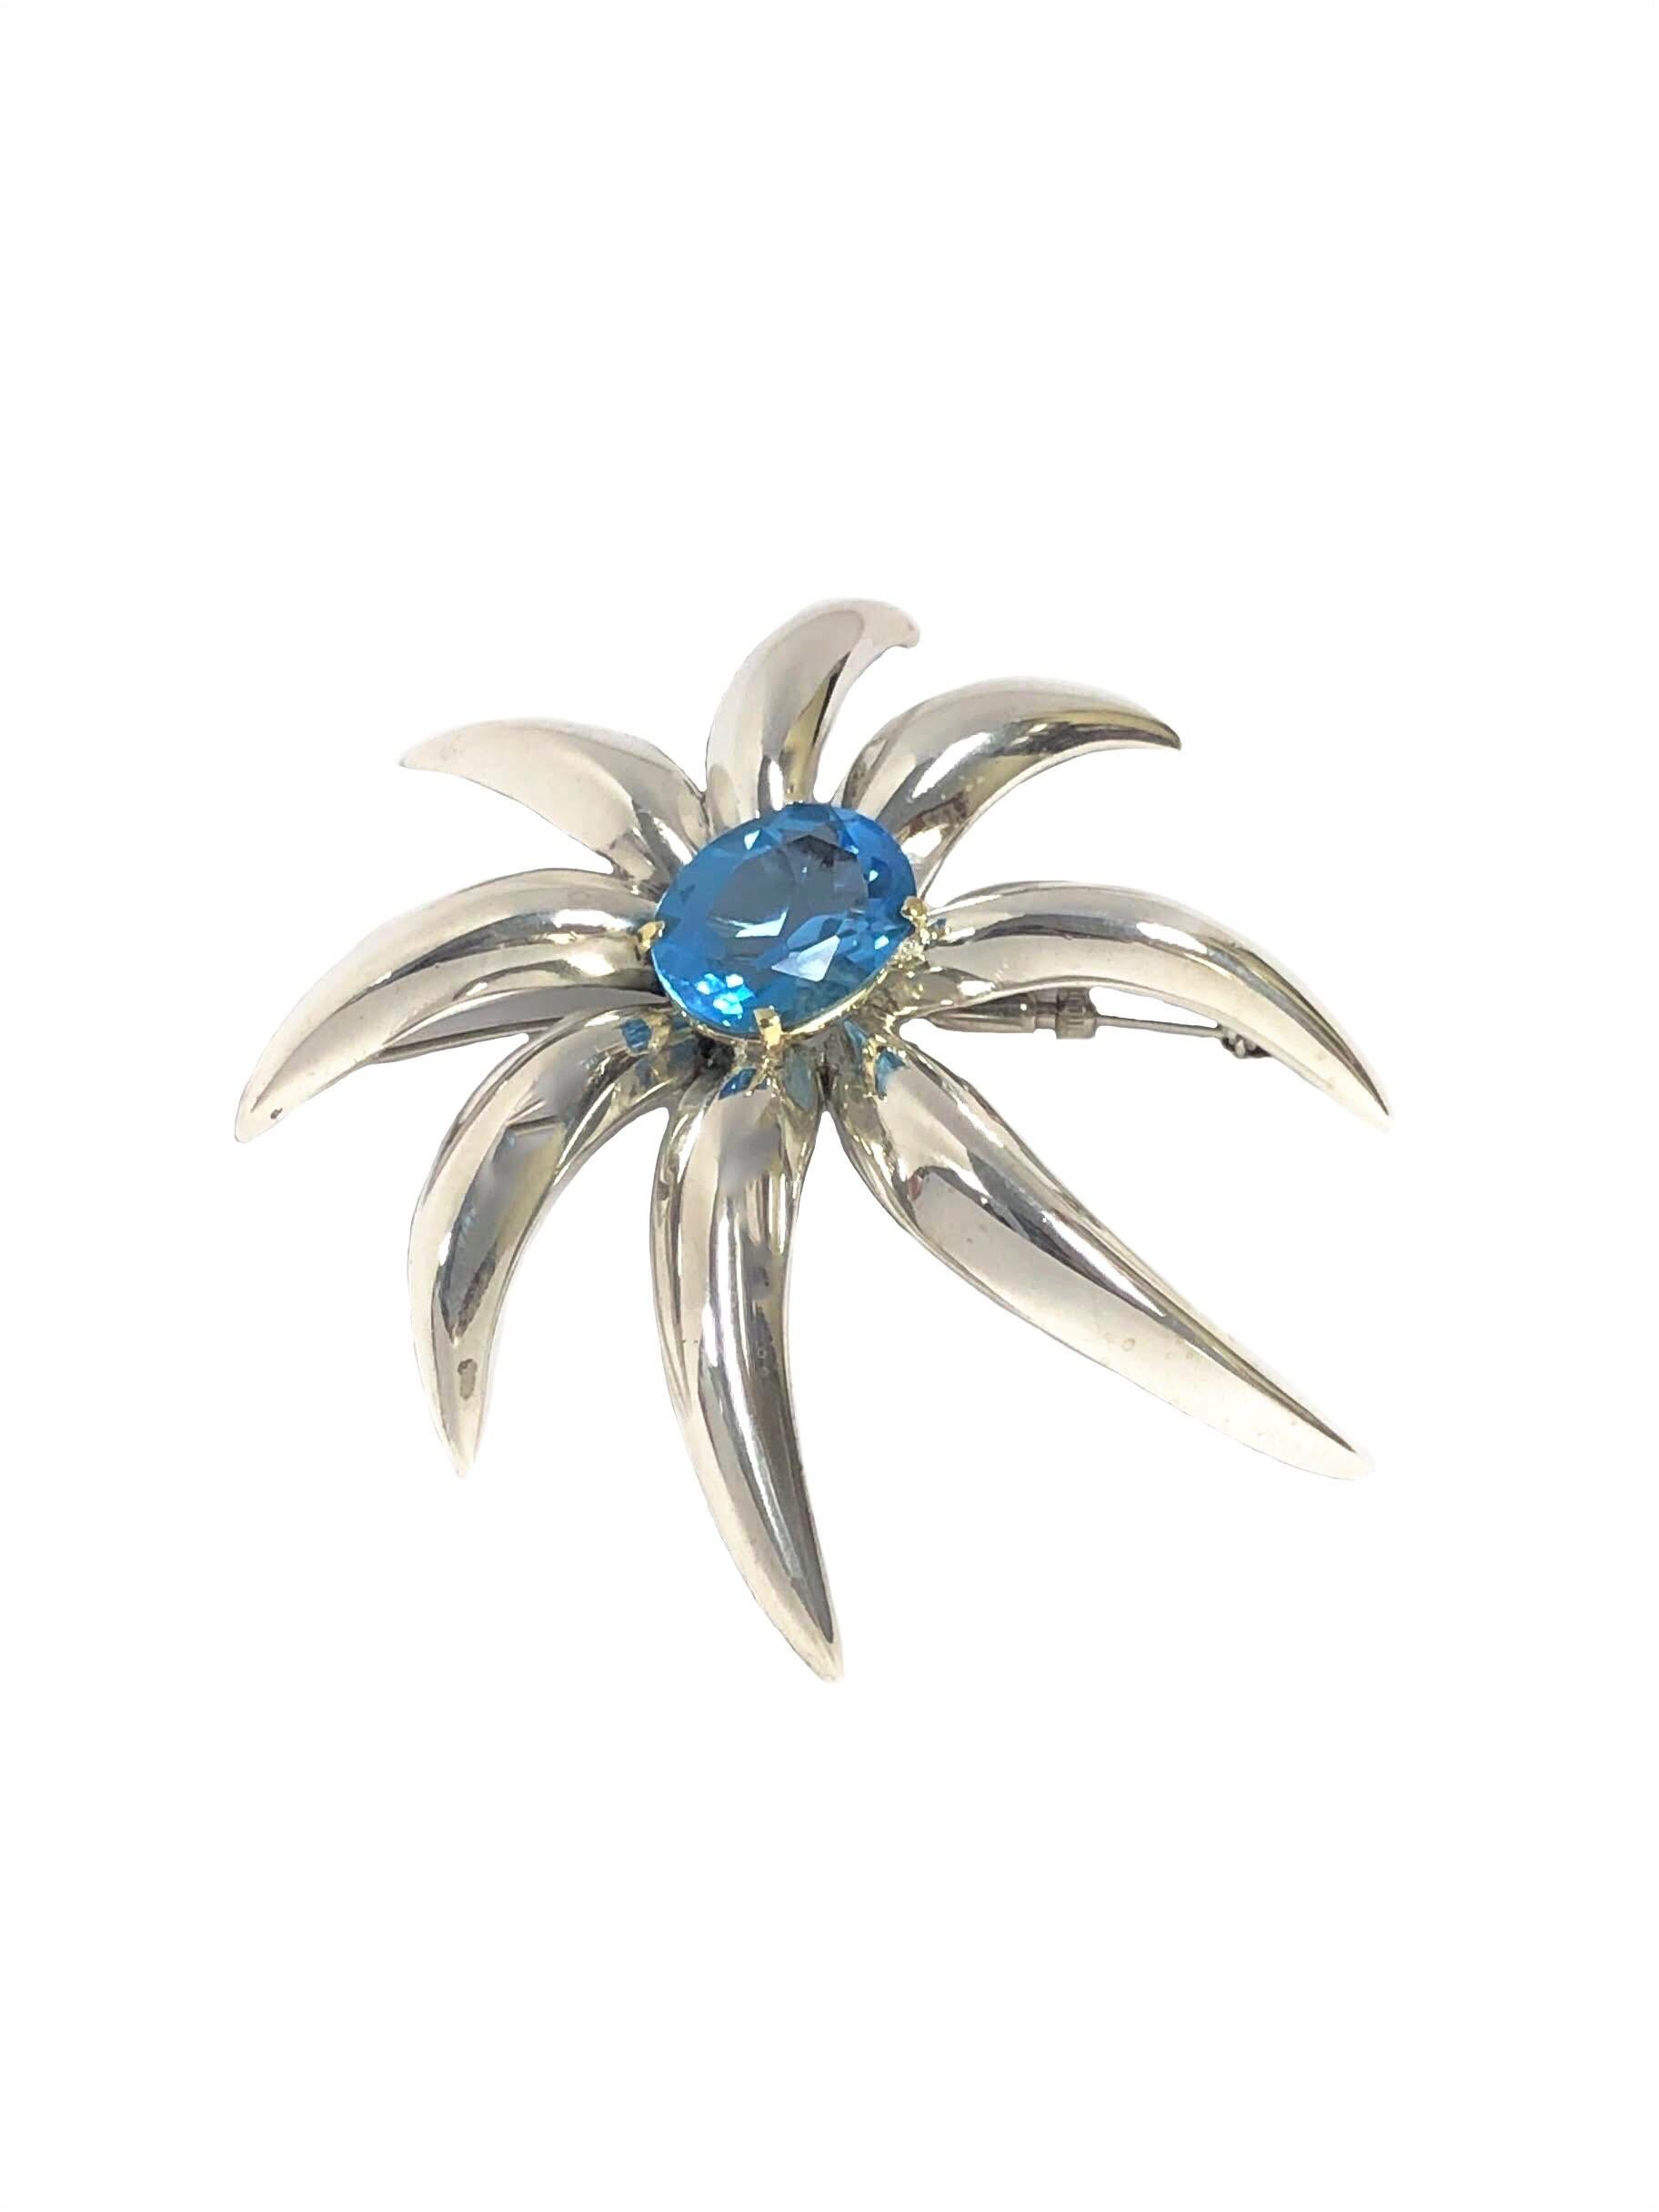 Oval Cut Tiffany & Co. Fireworks Large Silver Gold and Topaz Brooch